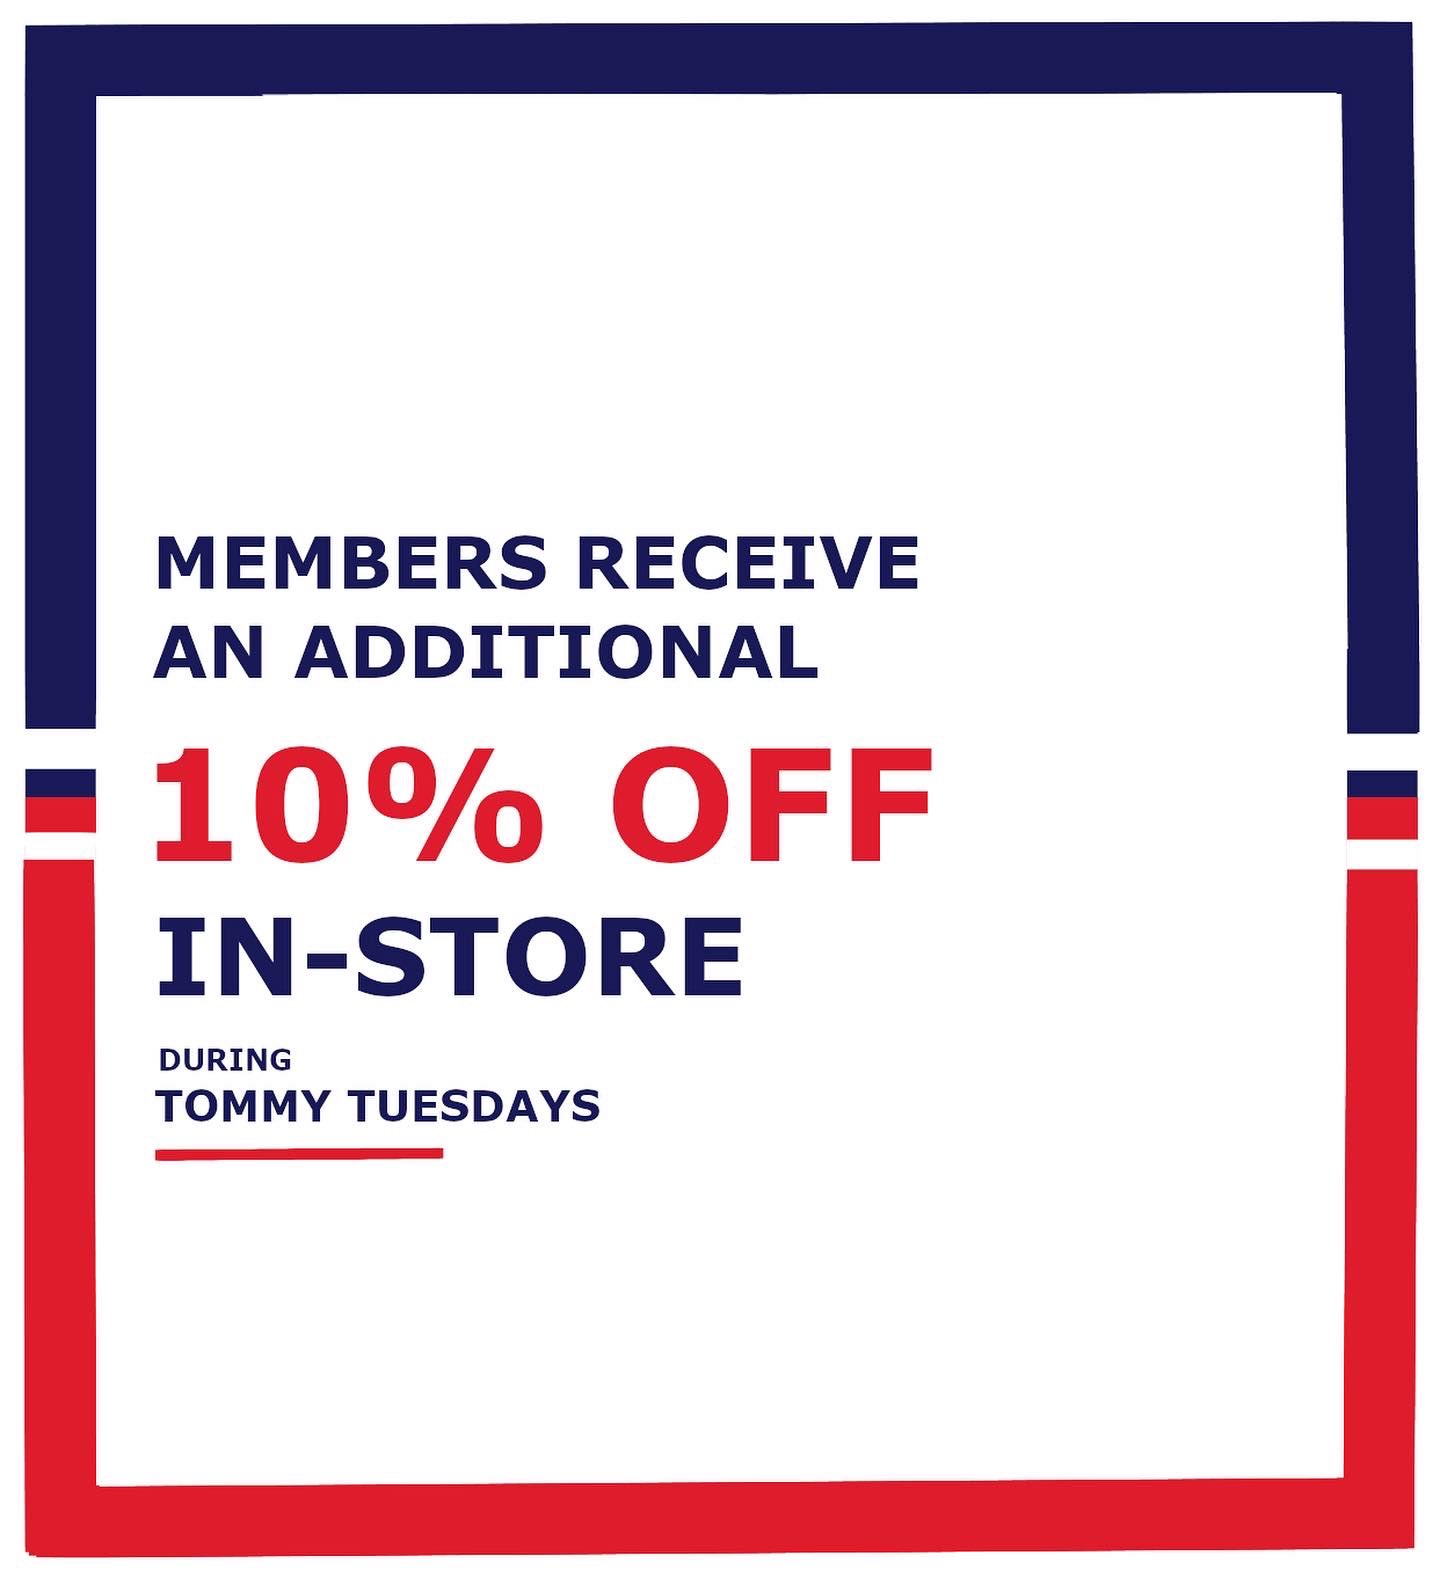 Premier Outlets on Twitter: Hilfiger: Our Reinvented⚡️ All polos buy one, get one 50% OFF* Plus, 20% OFF your purchase of $100+ OR 15% OFF your entire purchase** *EXCLUSIONS